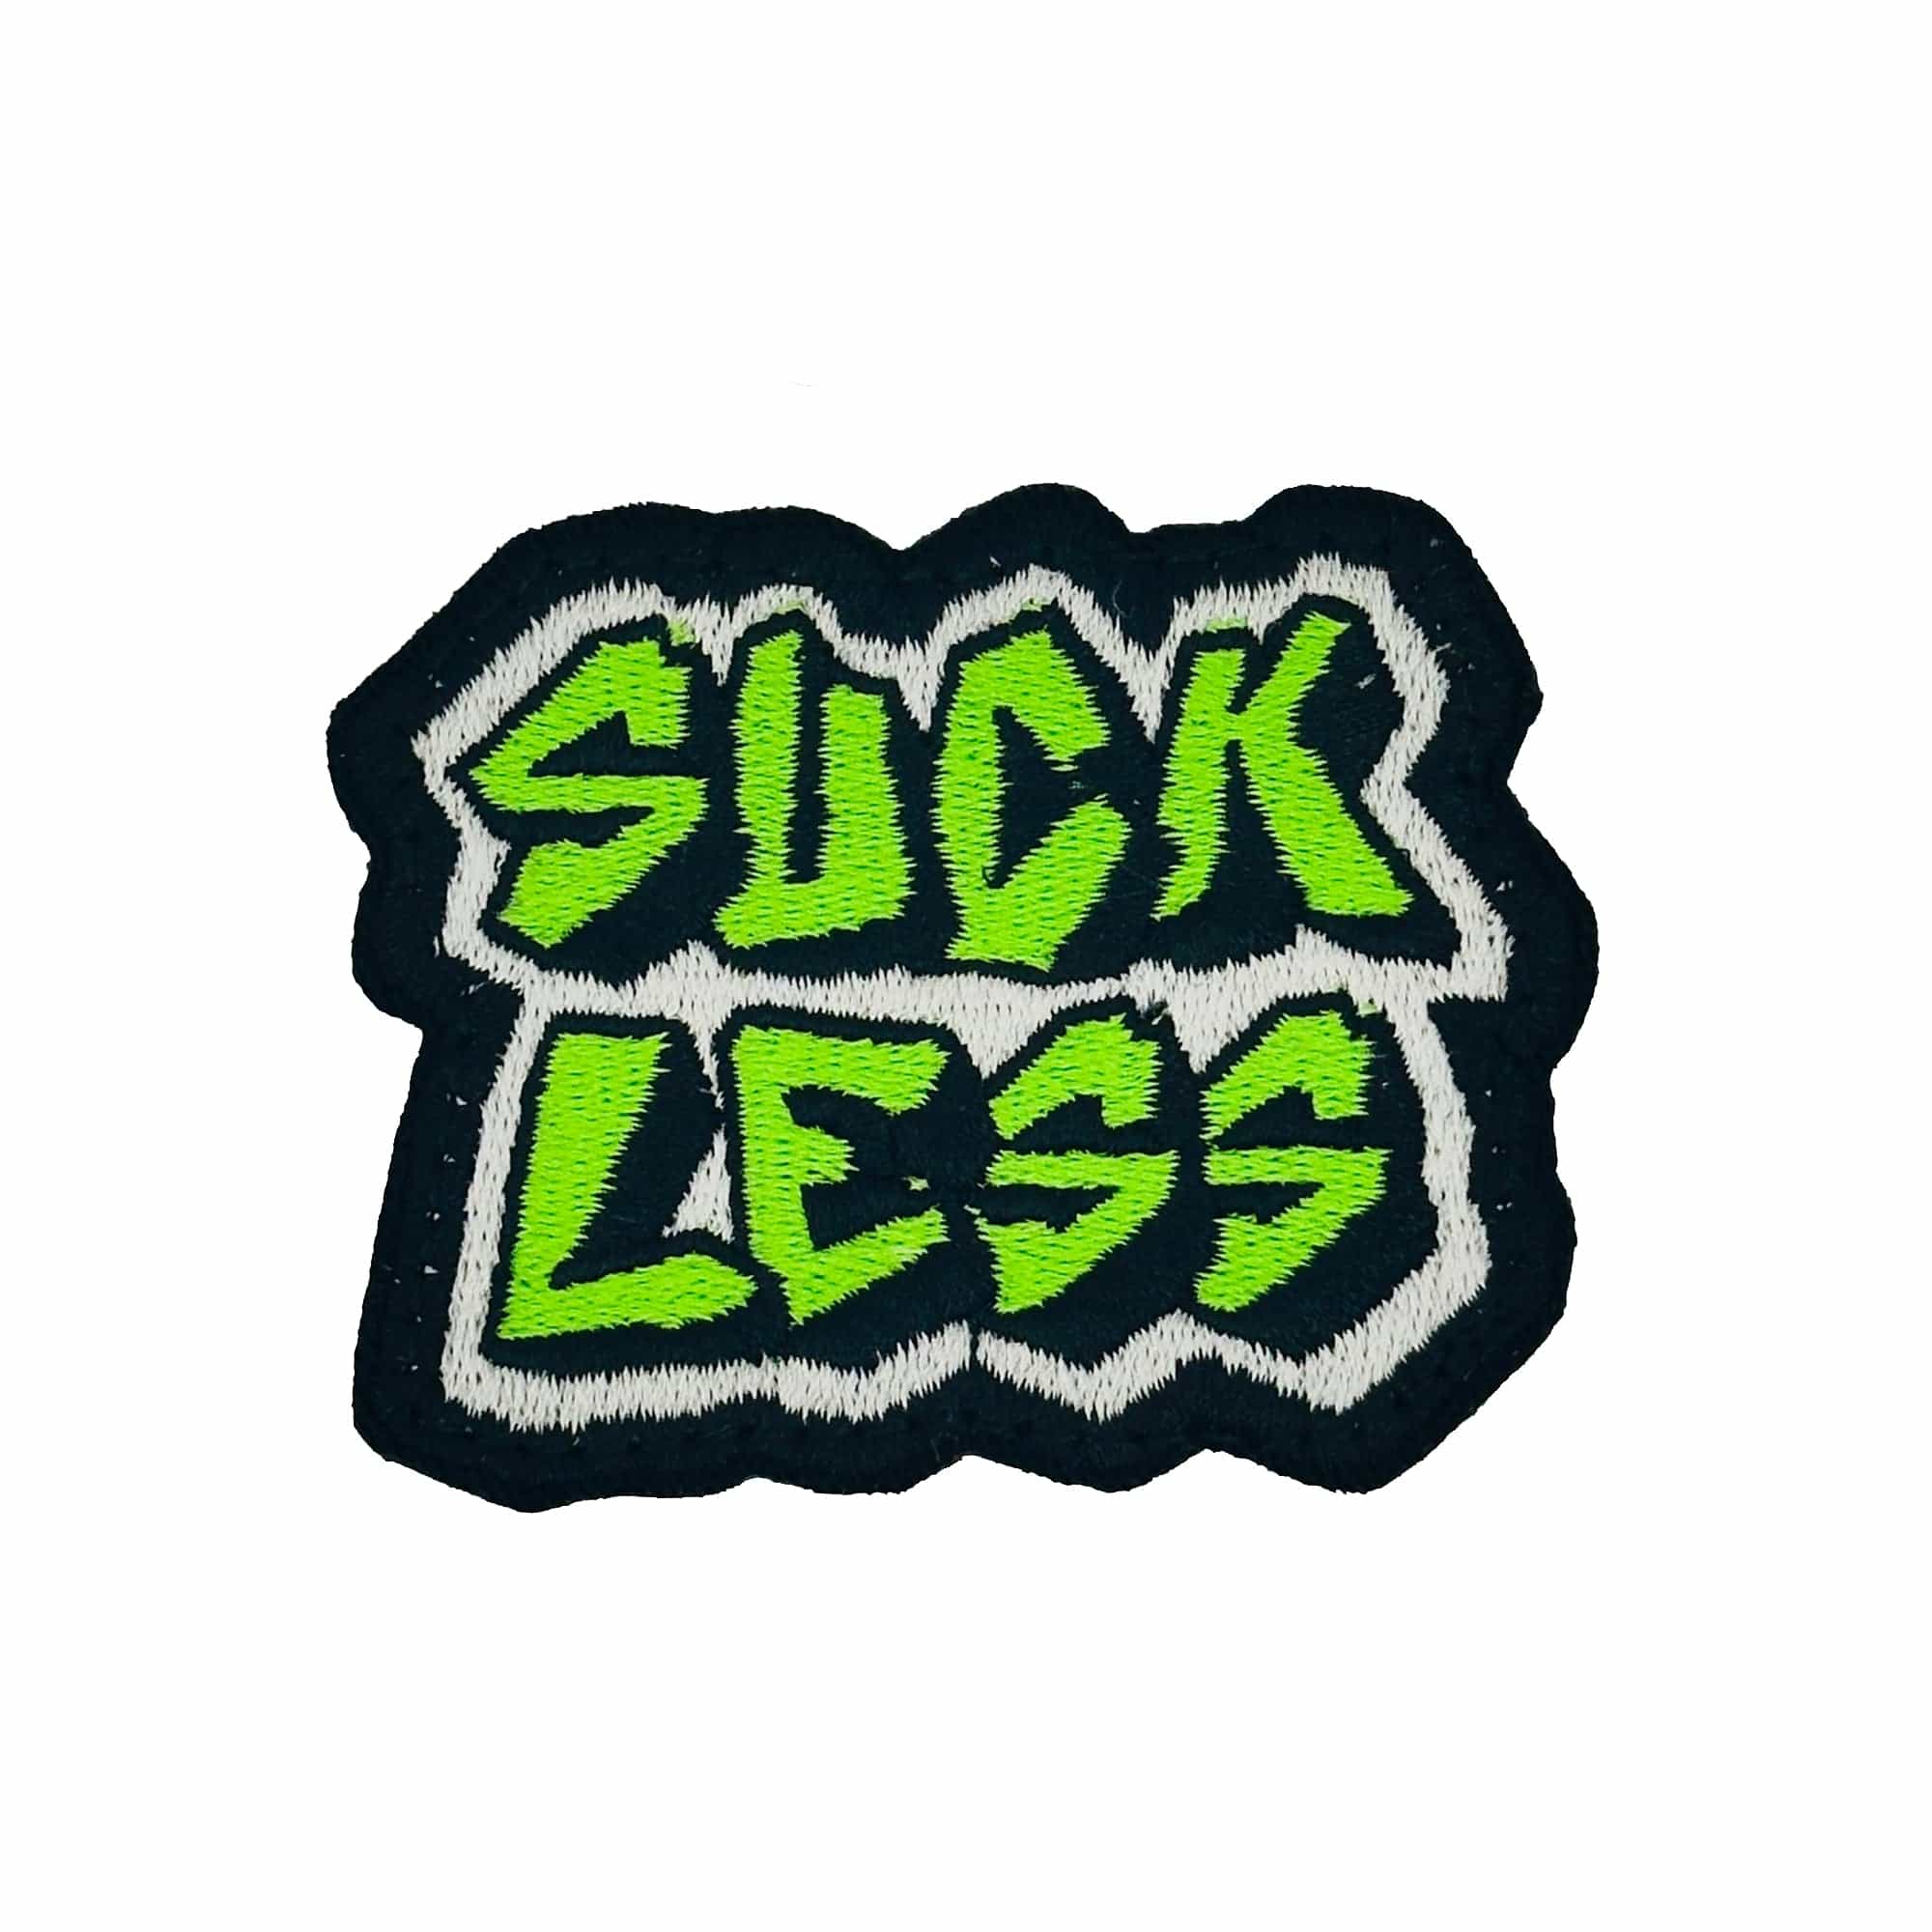 Tactical Gear Junkie Patches Suck Less - 2.5" Patch